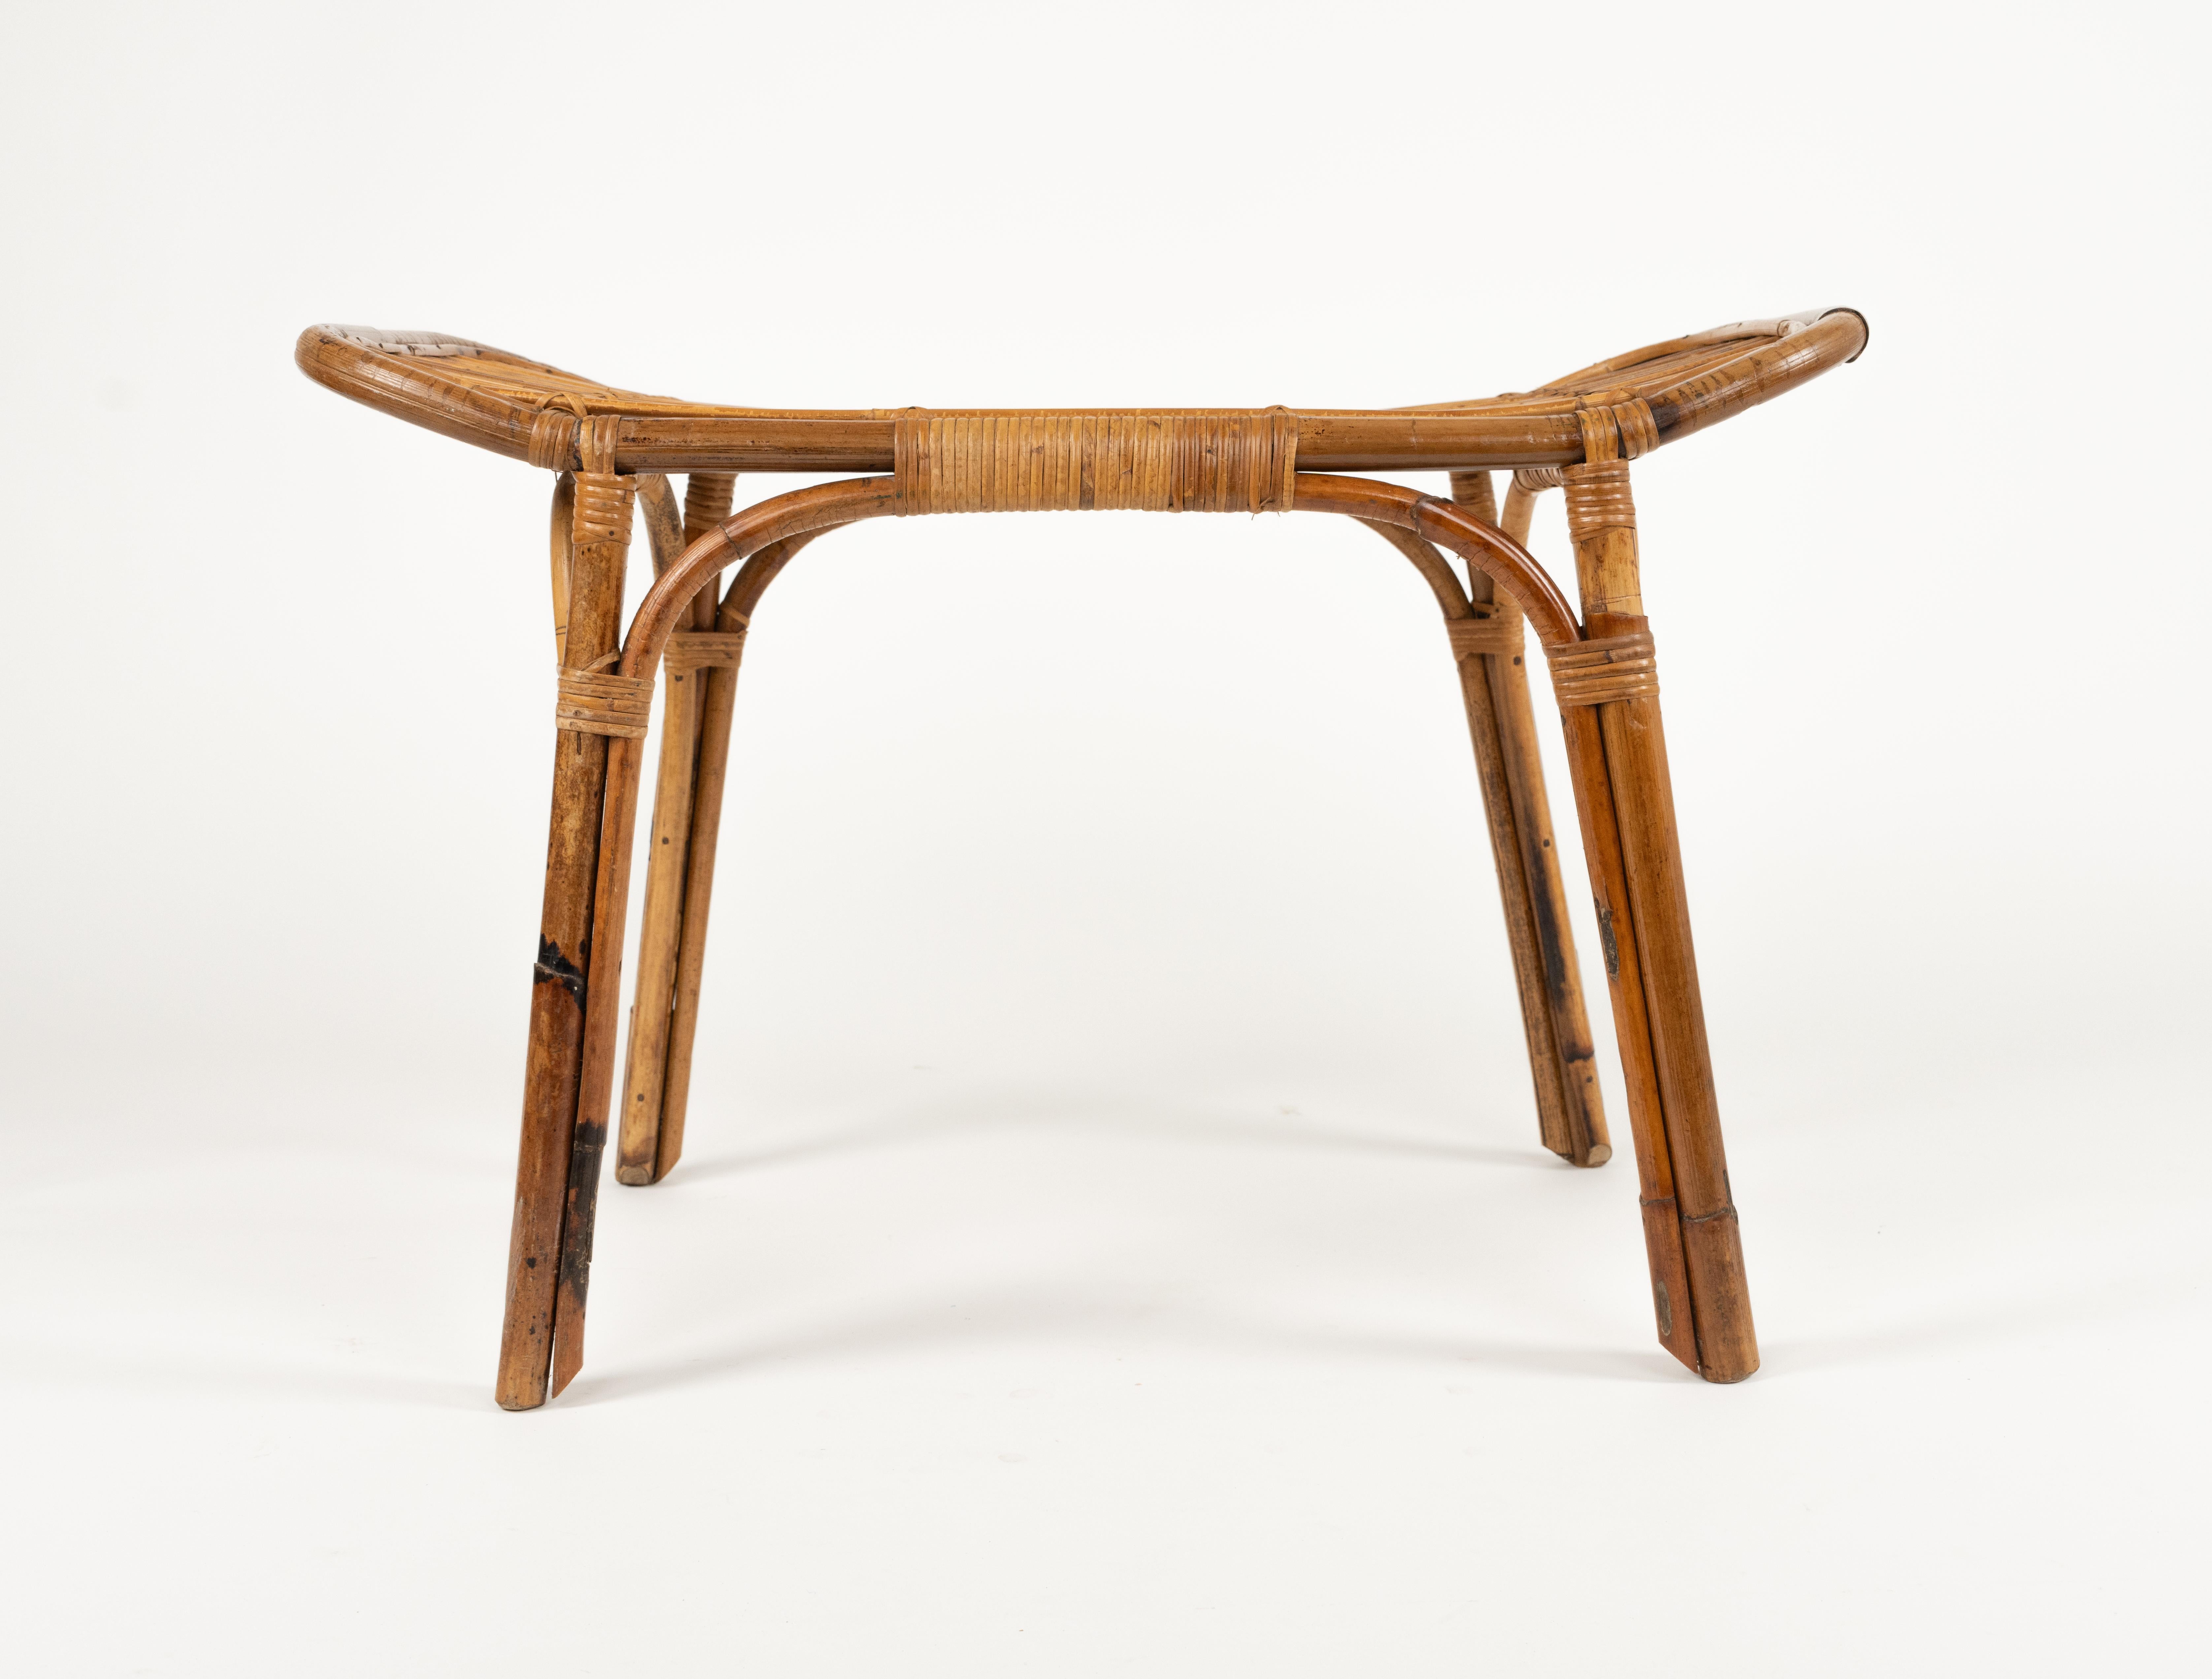 Midcentury Bench or Side Table in Rattan & Bamboo Tito Agnoli Style, Italy 1960s For Sale 8